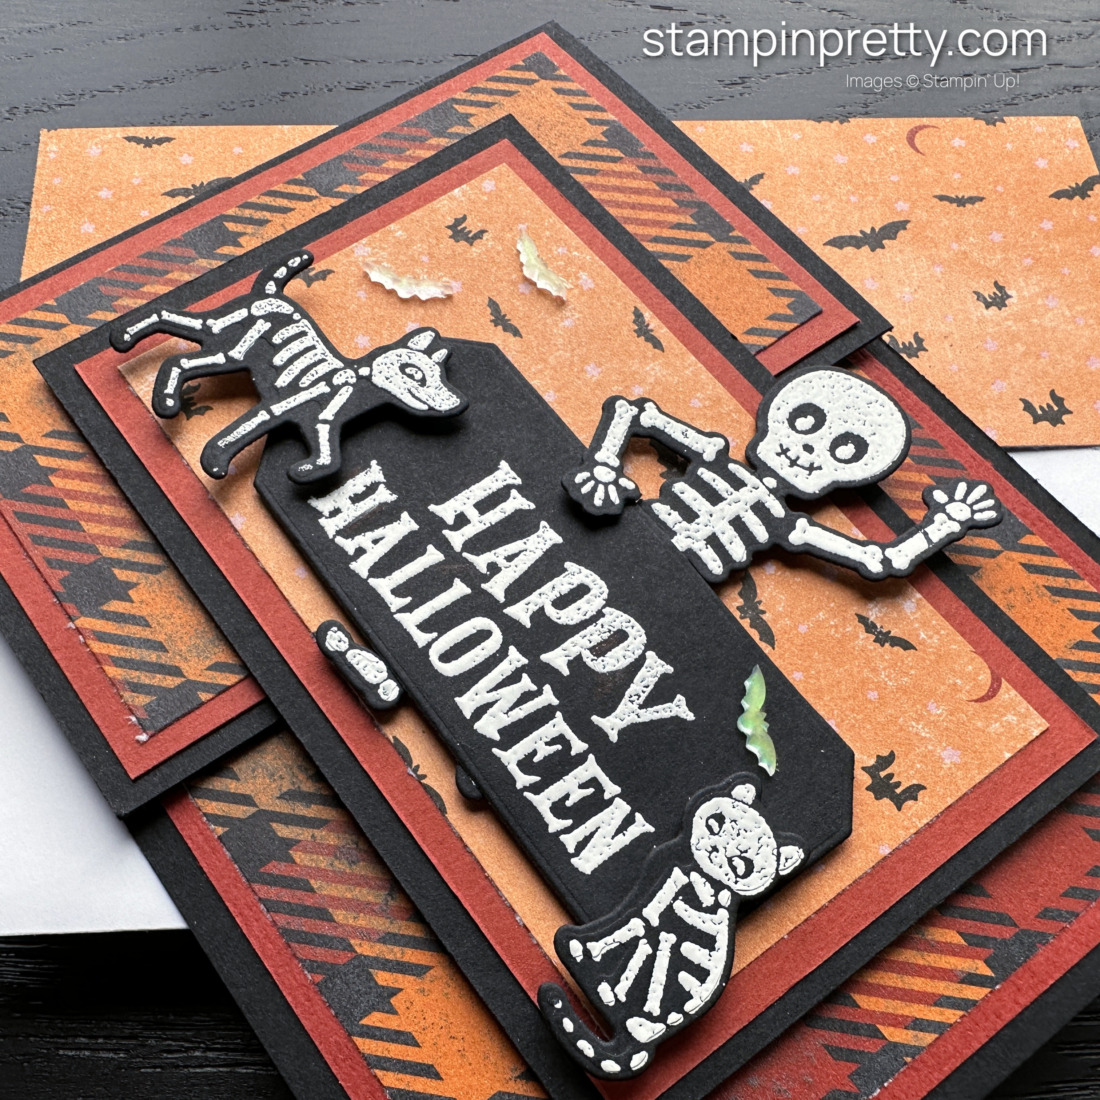 Create a Happy Halloween Fun Fold Card Using Them Bones Suite Collection by Stampin' Up! Card Design by Mary Fish, Stampin' Pretty